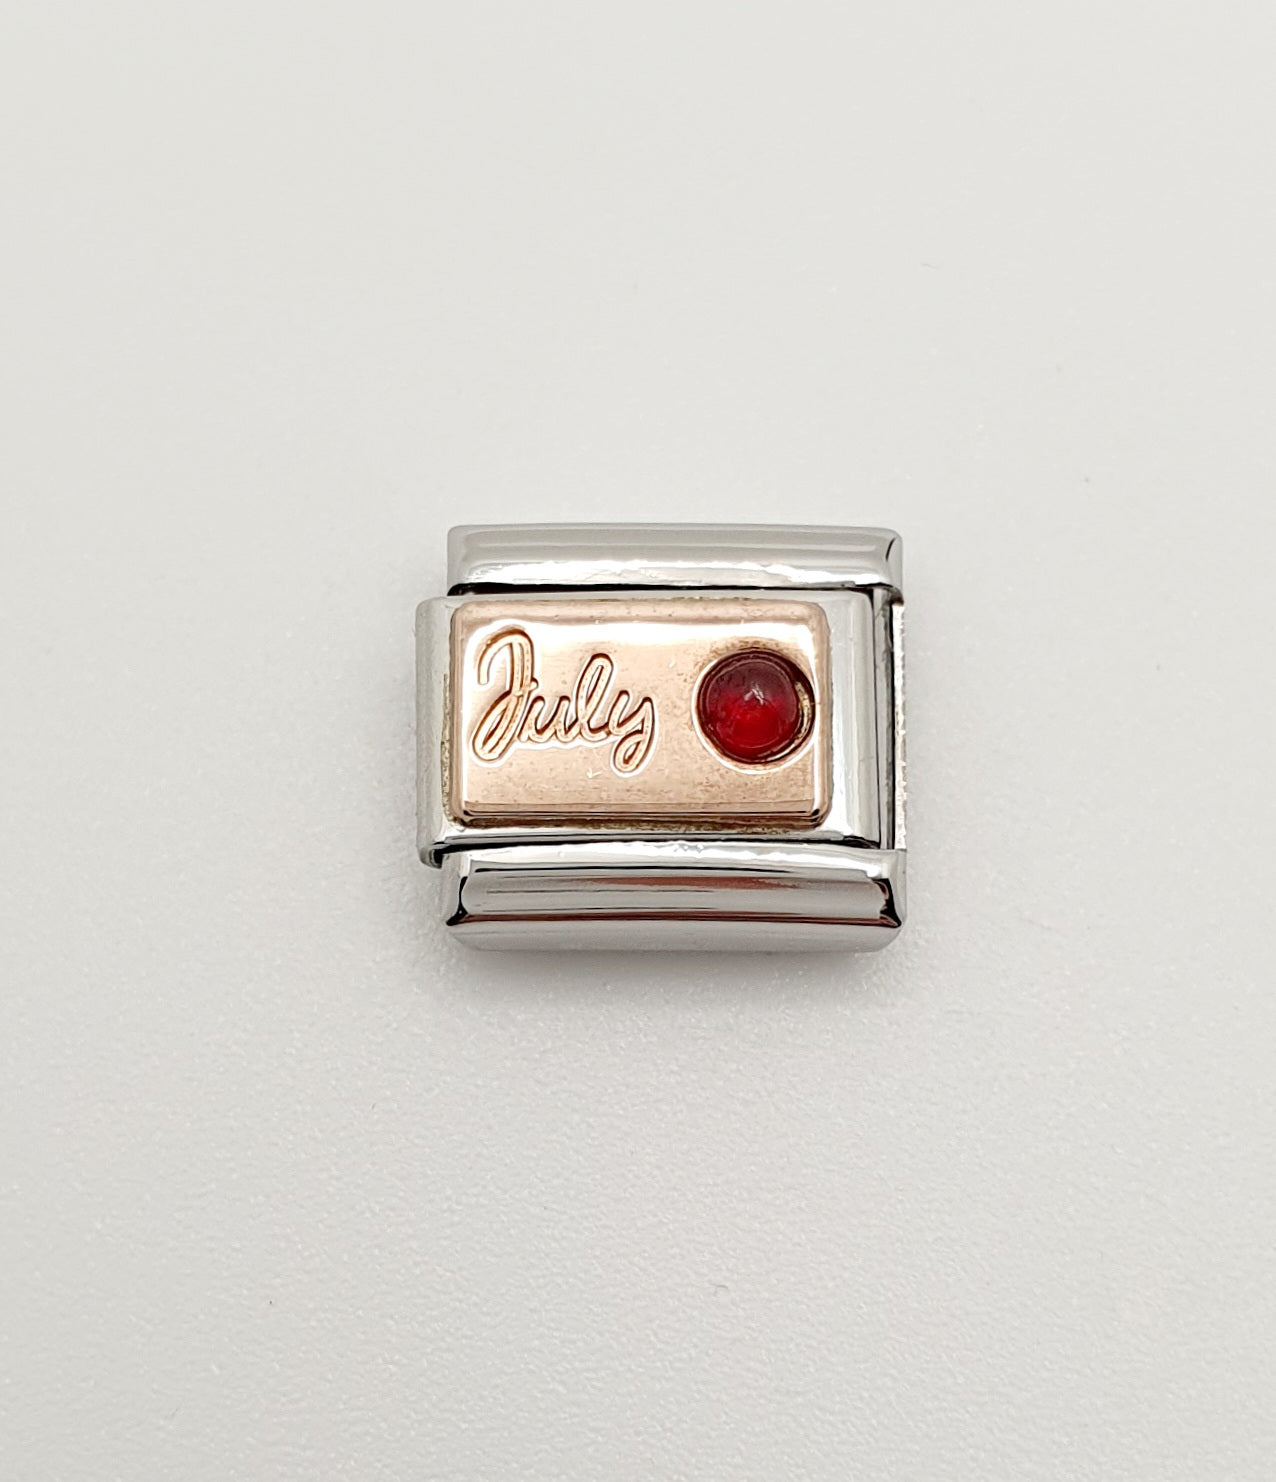 Nomination Charm Link "July Ruby" Stainless Steel with 9k Rose Gold, 430508 07